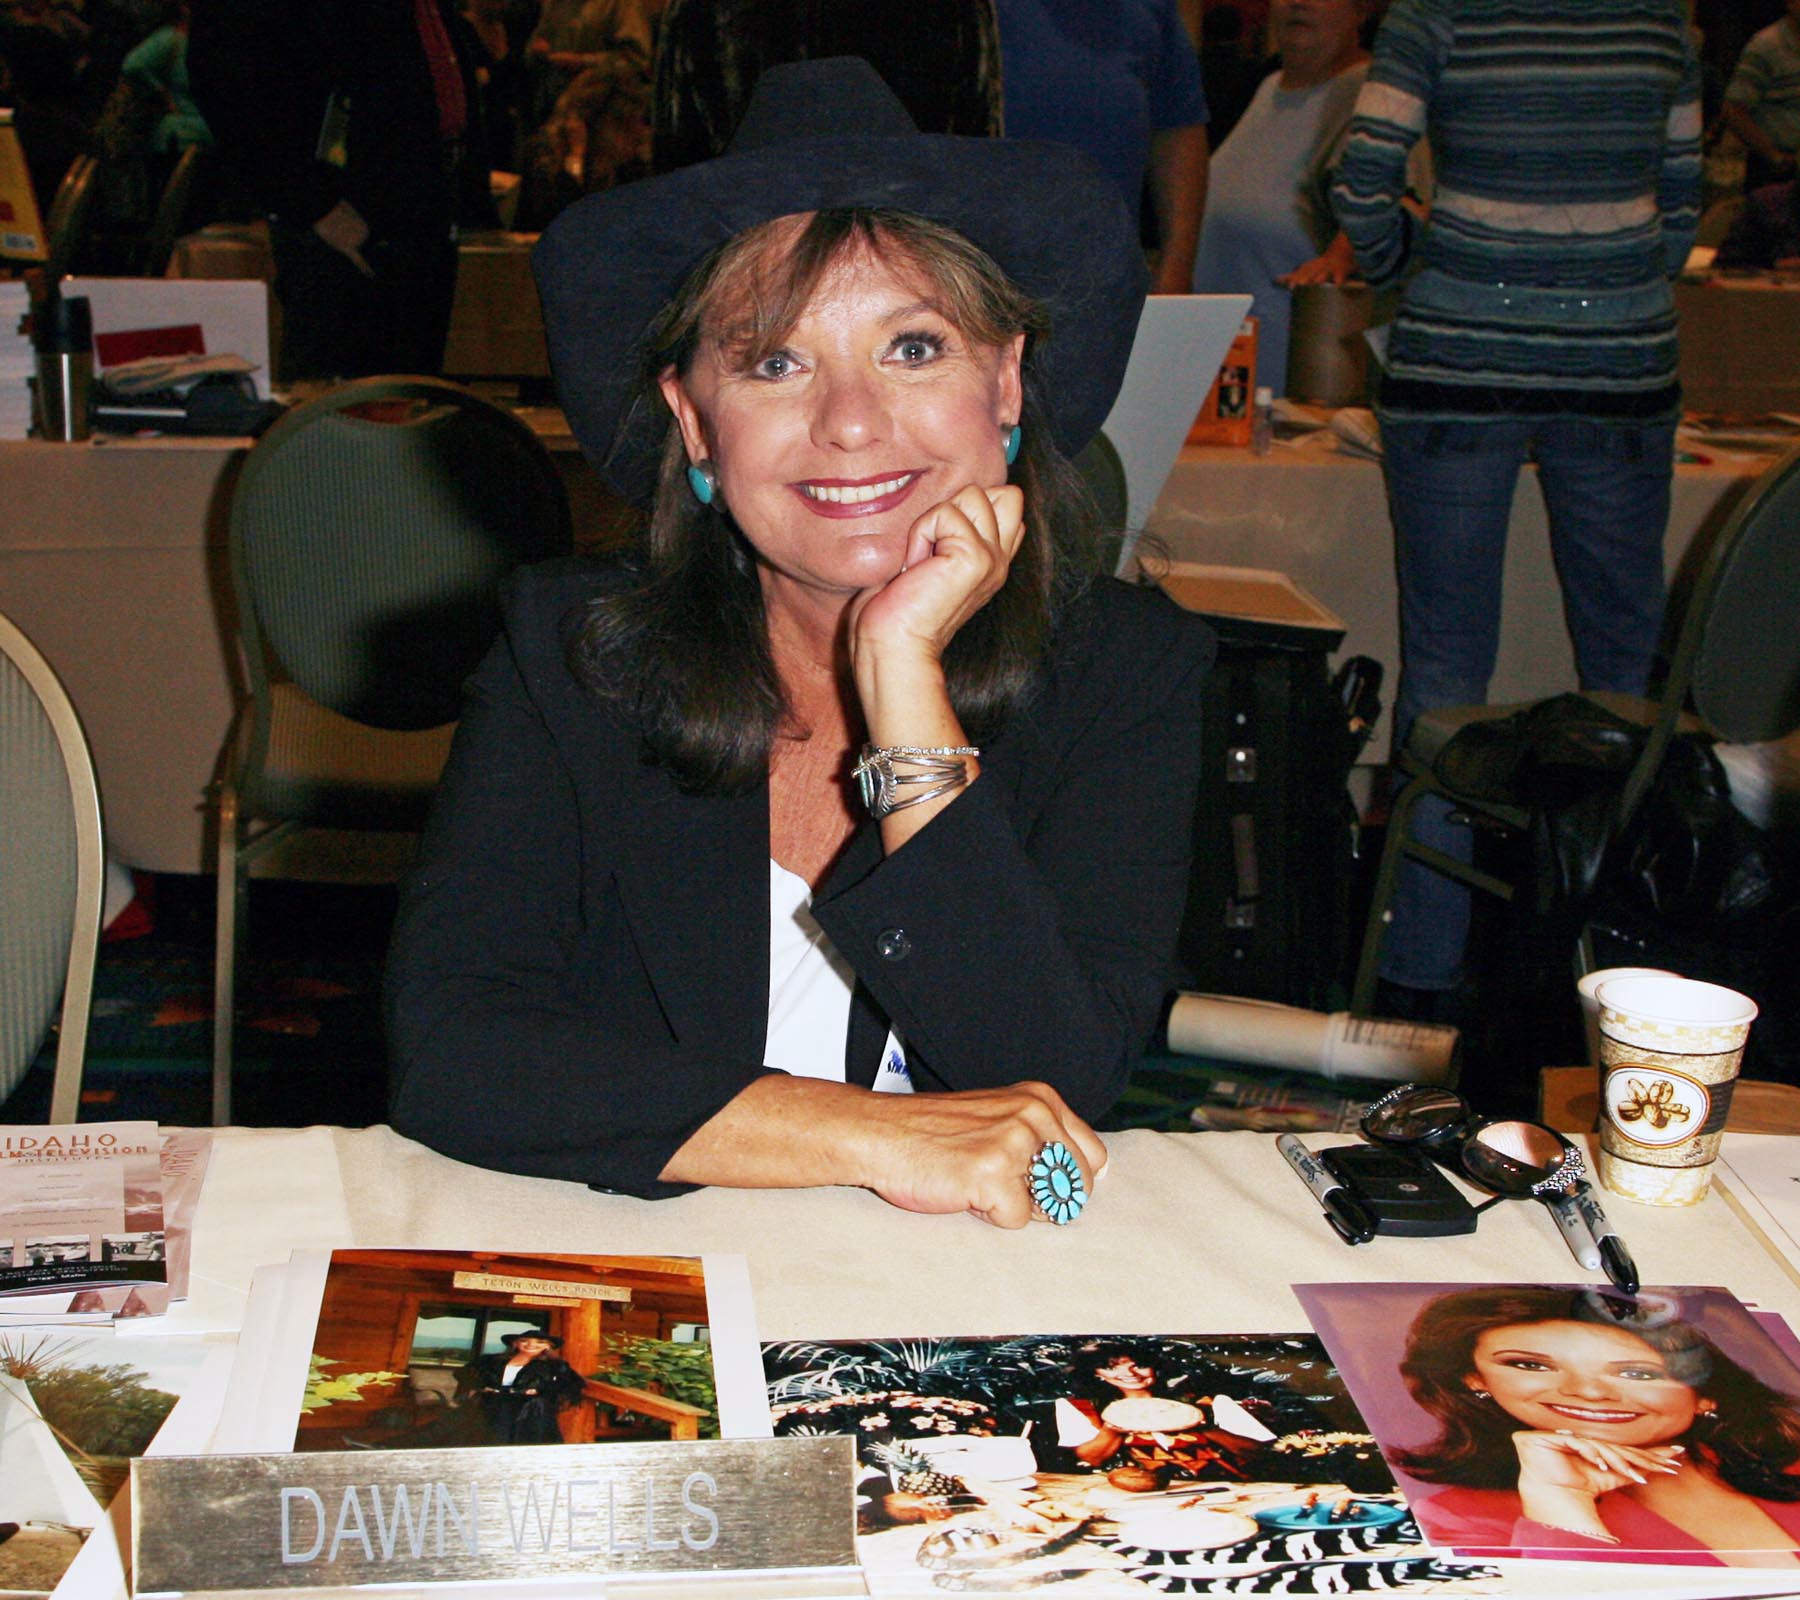 A photo of Dawn Wells sitting pretty in front of a table plastered with pictures of her in different locations.